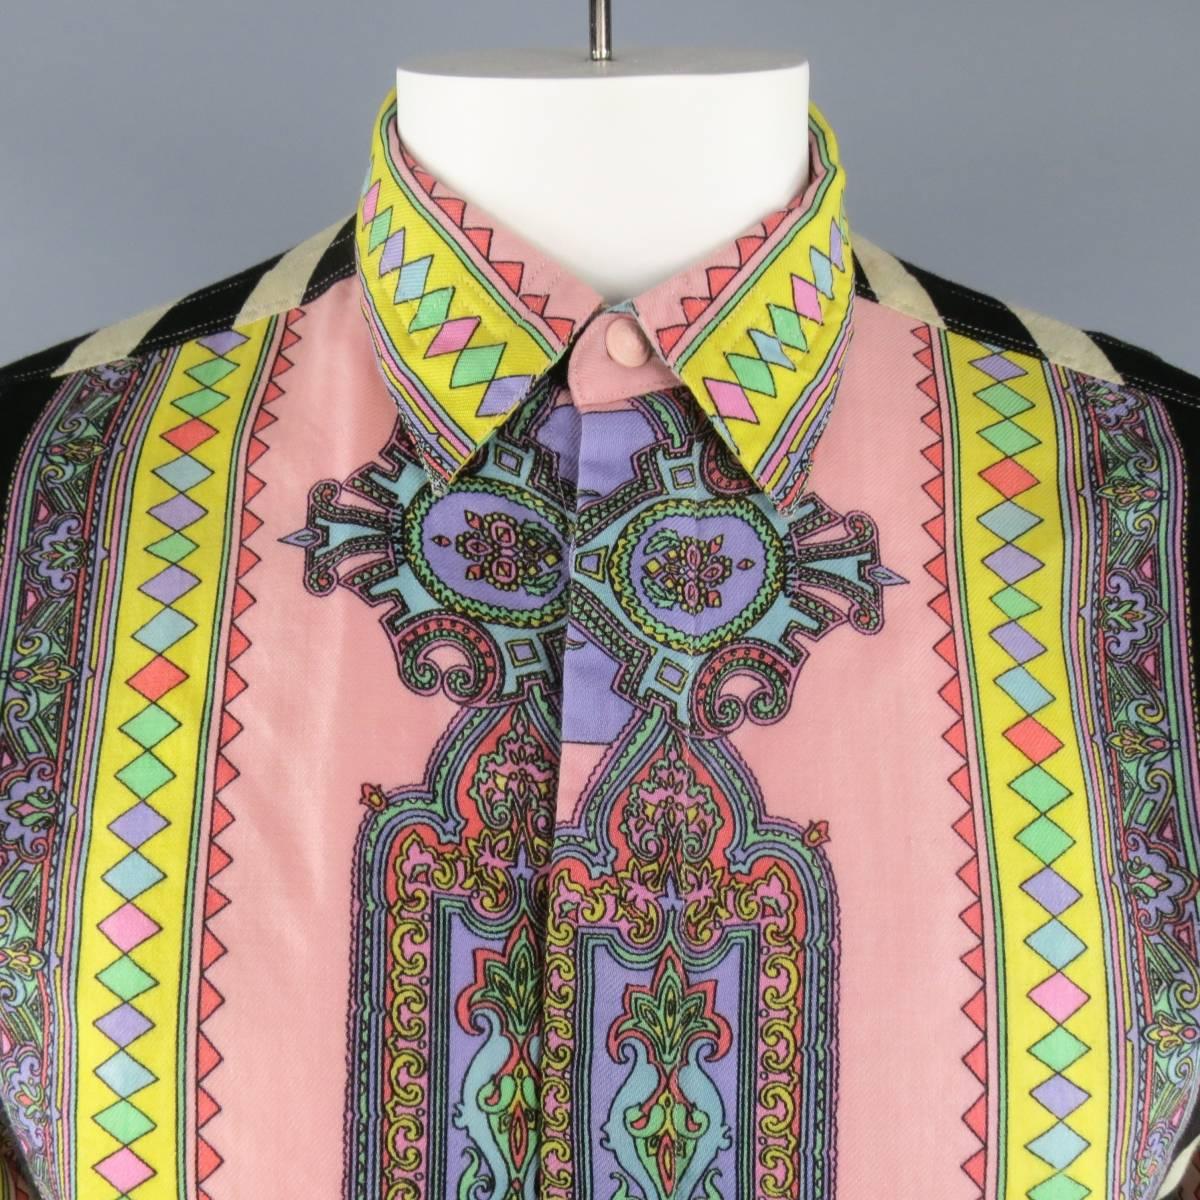 Vintage VERSUS by GIANNI VERSACE shirt from the late 1980's - early 1990's comes in a light weight wool twill and features a hidden placket front with pink lion head button, pointed collar, and all over multi-color pastel and black and beige